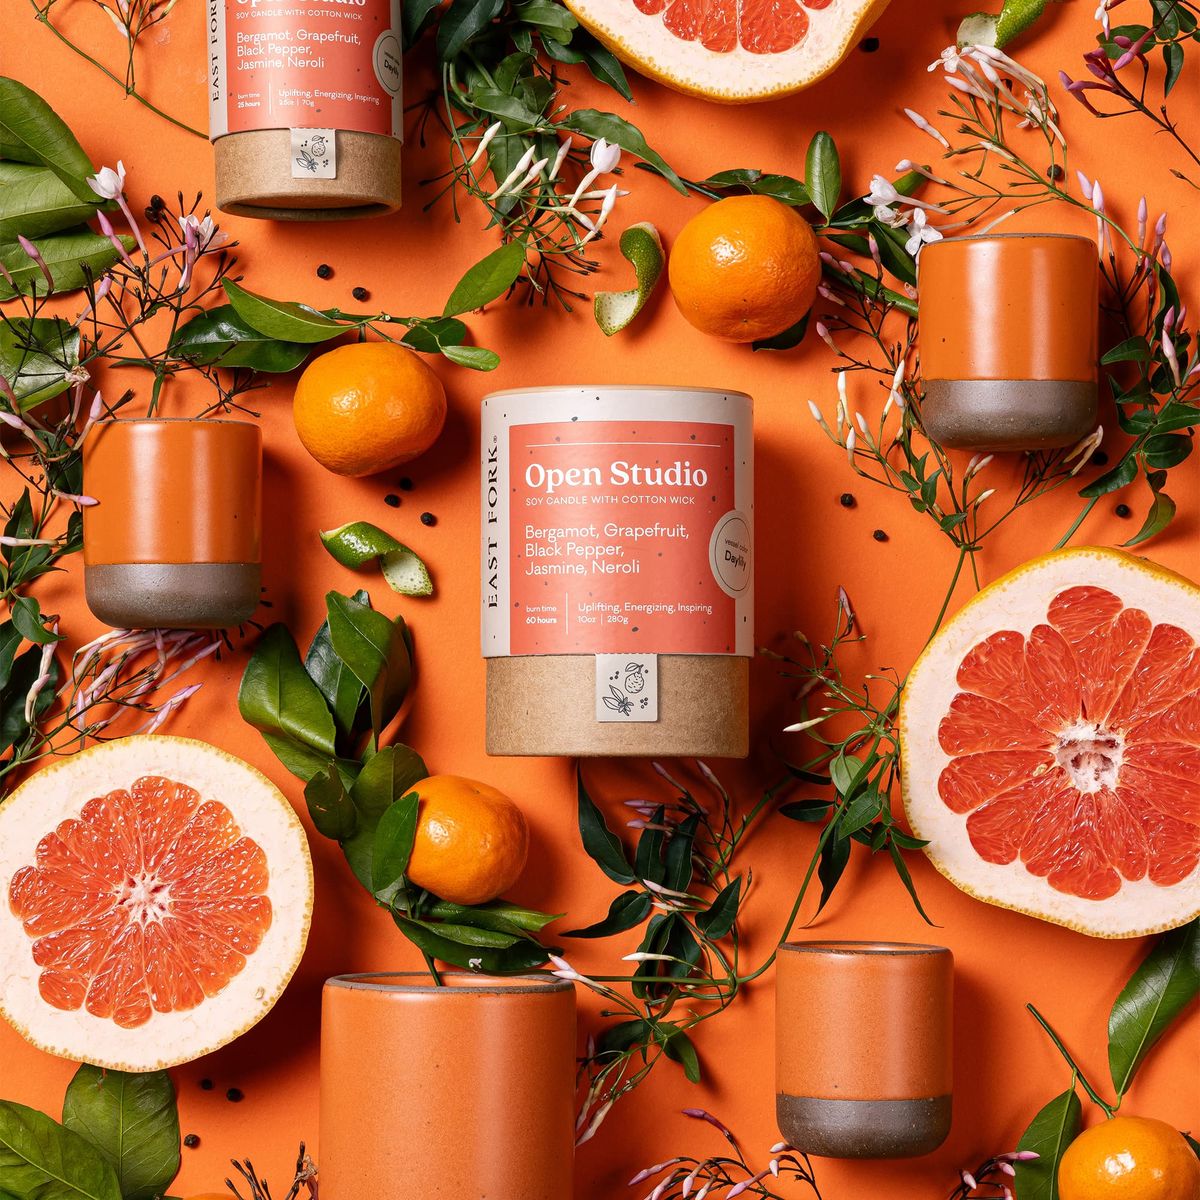 An artful layout of The Candle in Open Studio - centered is a cardboard packaging tube with the candle's name, surrounded by small and large ceramic candles in a cylindrical vessel in a bold orange color, surrounded by sliced grapefruits, oranges, and greenery.